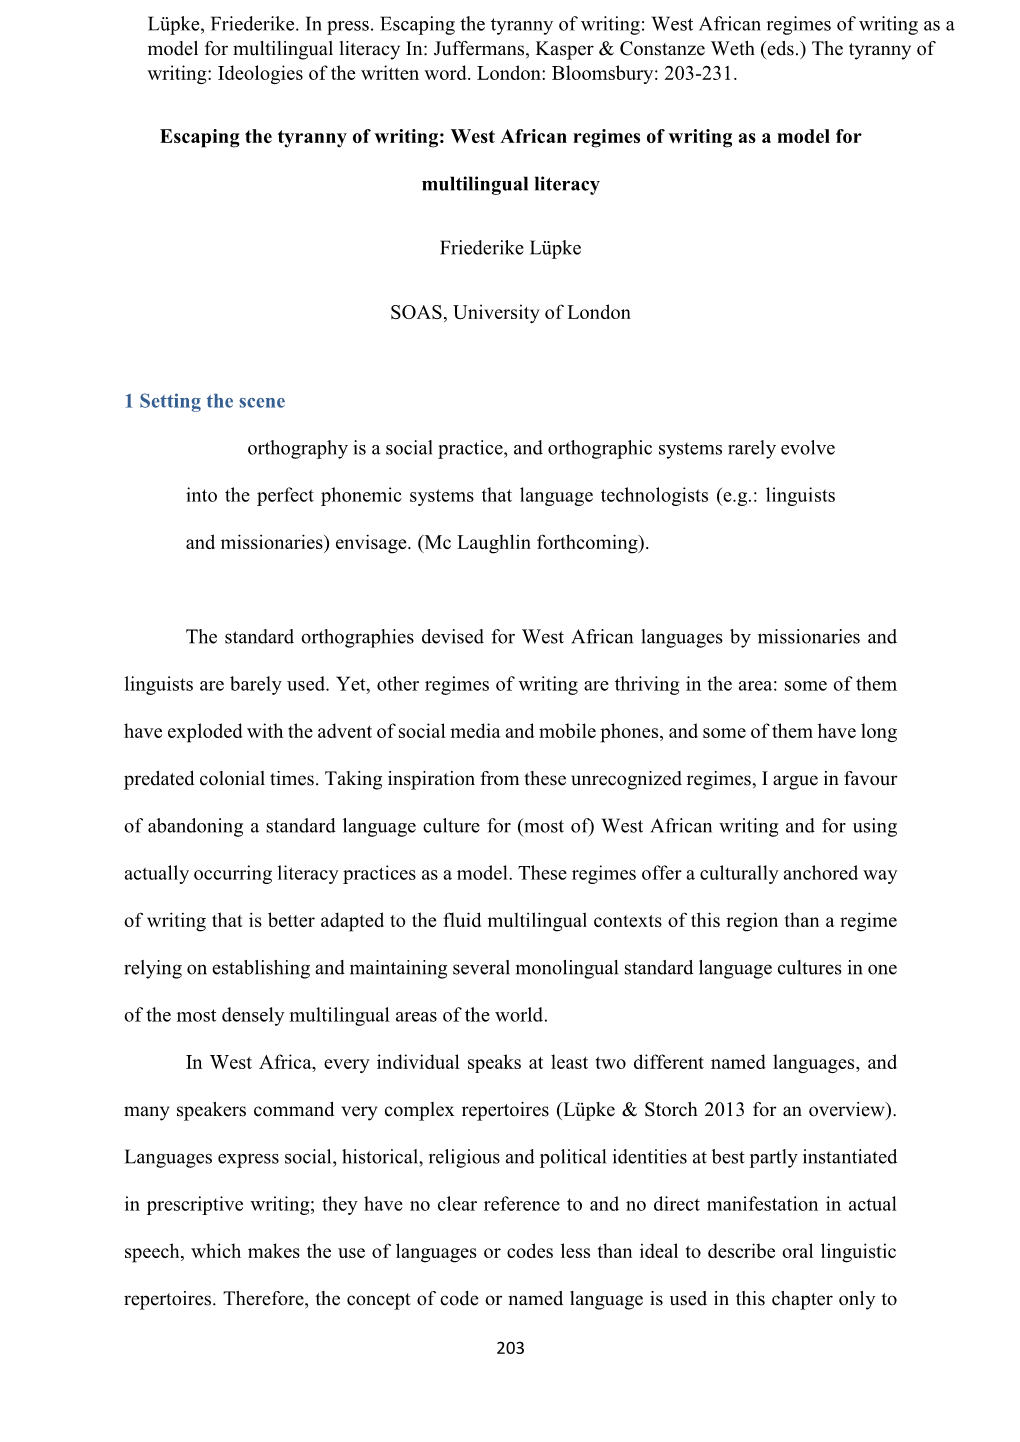 Escaping the Tyranny of Writing: West African Regimes of Writing As A